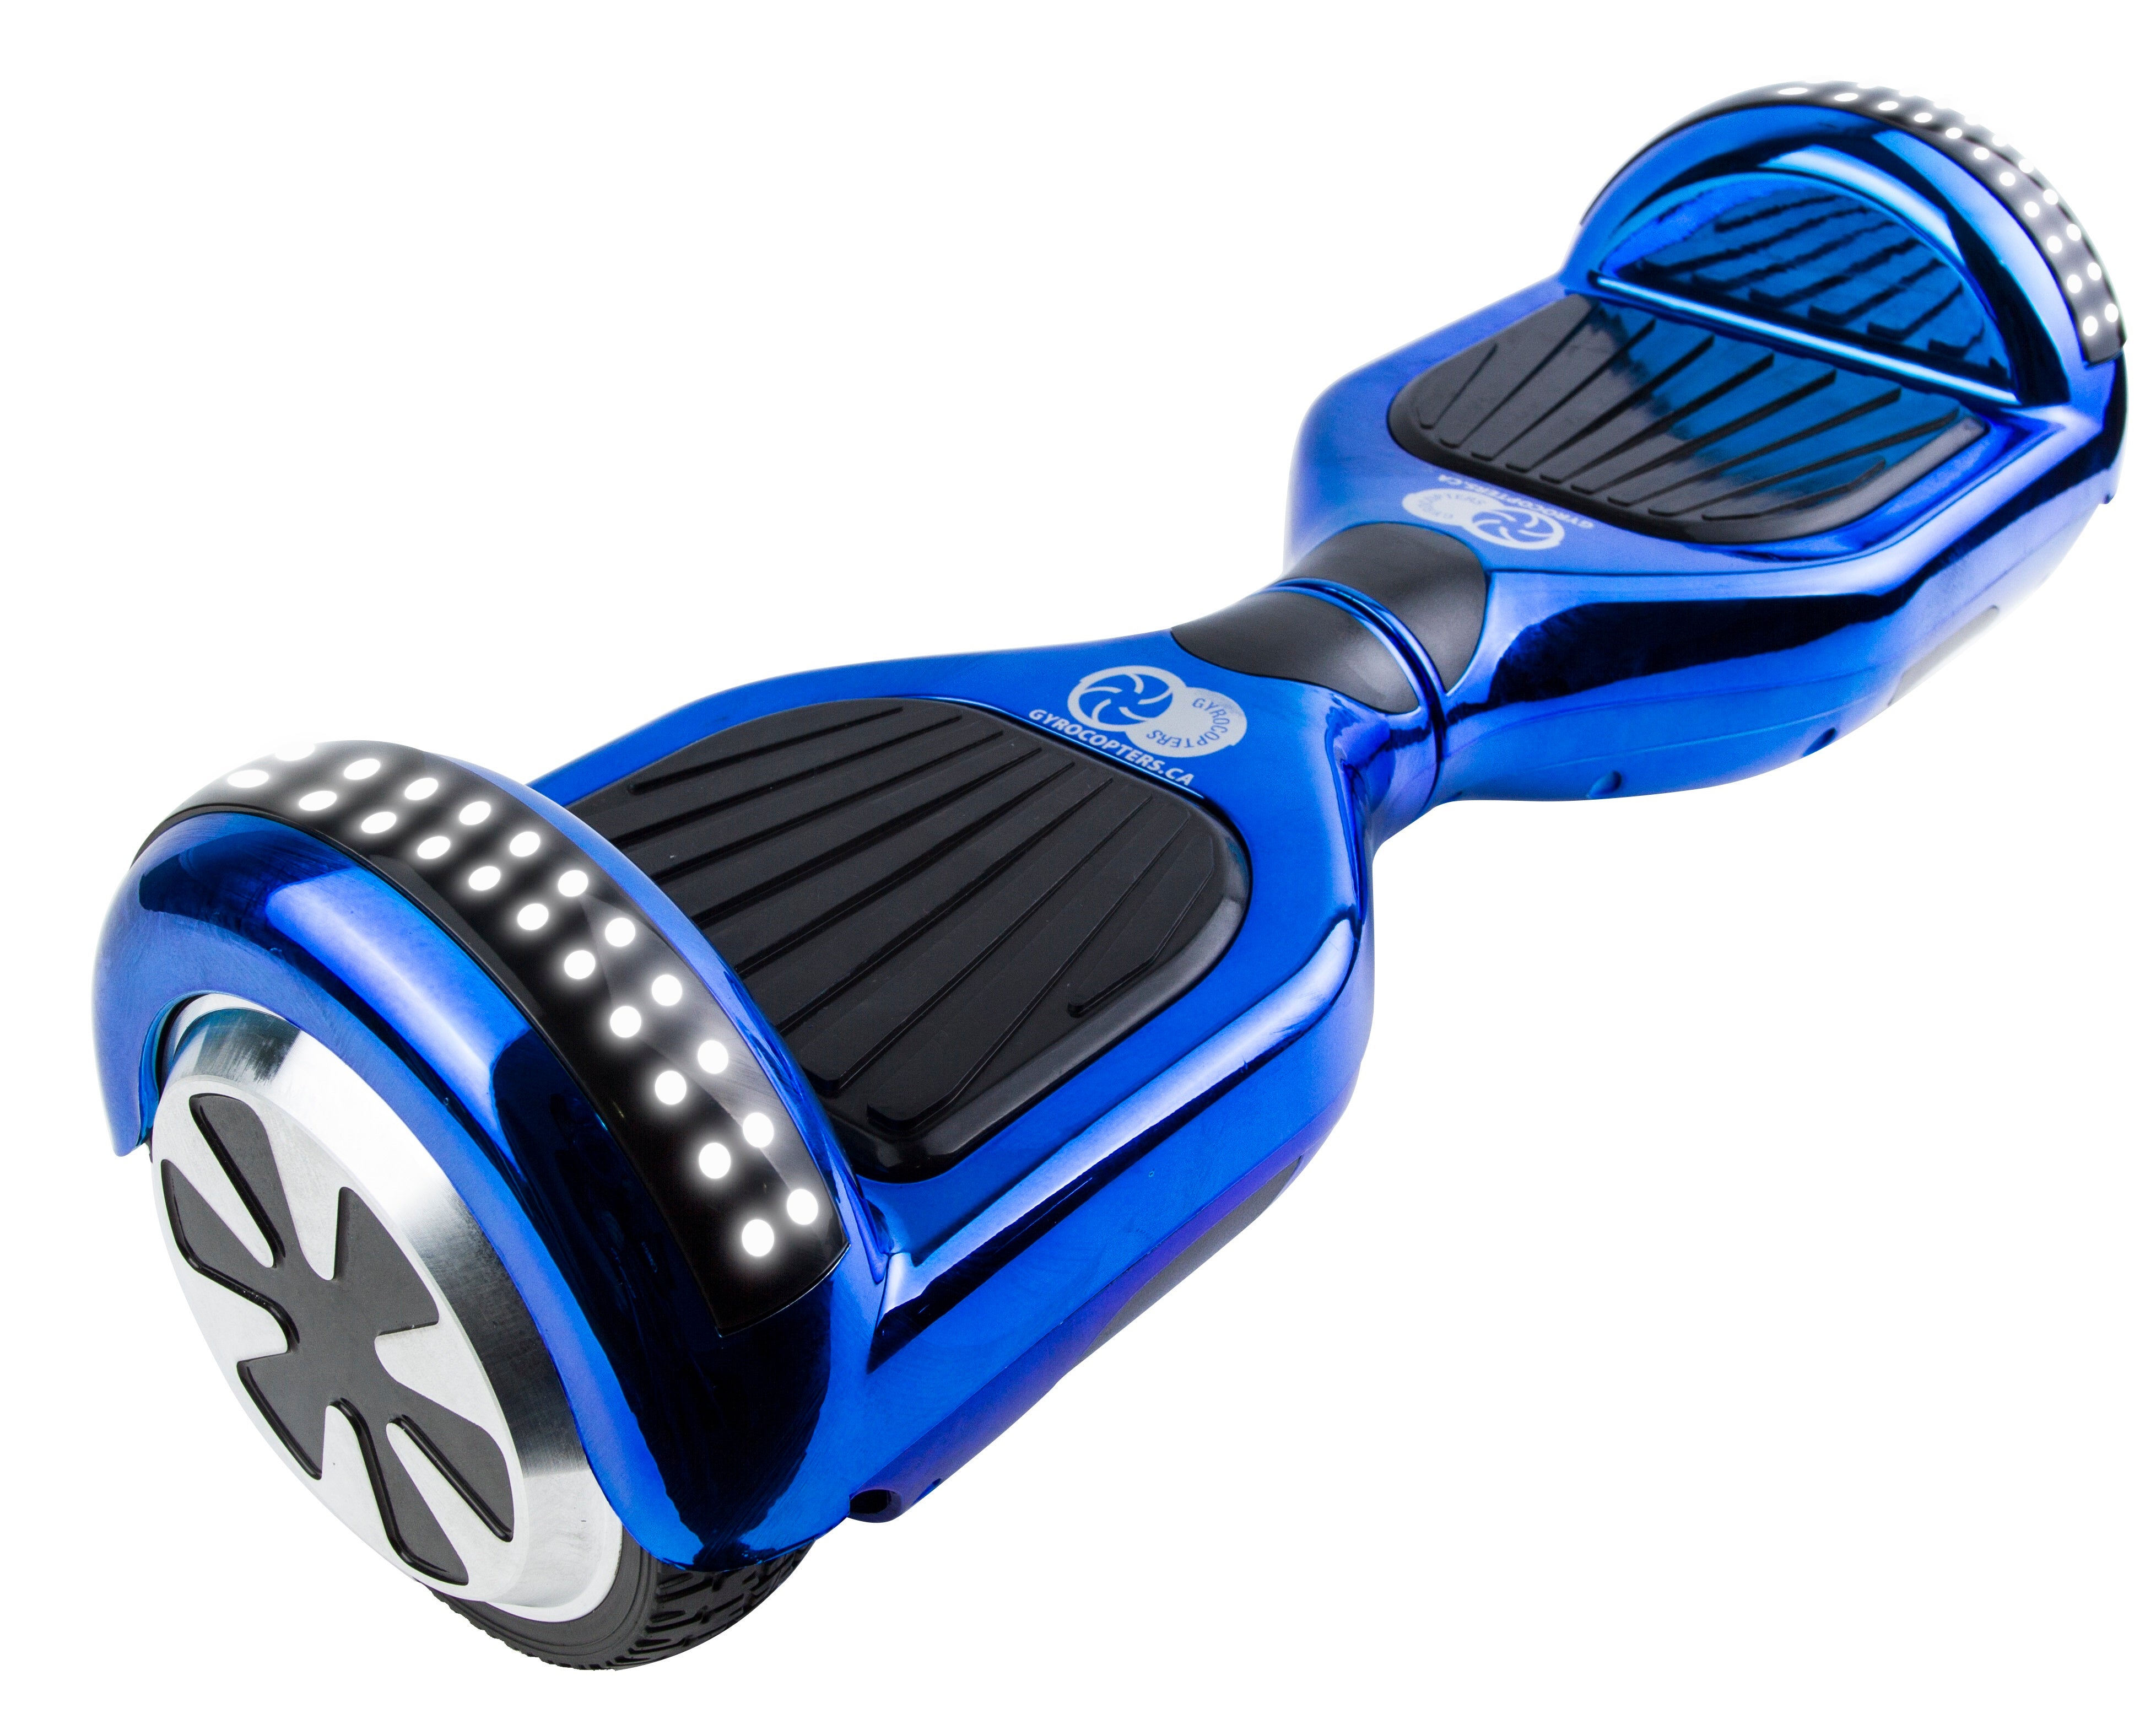 Gyrocopters hoverboard, Pro 2.0 hoverboards, chrome blue hoverboards, Hoverboards toronto, Hoverboards Canada, hoverboard, electric scooter, hoverkart, hoover board, hover, swagtron, hover board, gyrocopters hoverboard, hovercart, off road hoverboard, self balance scooter, canadian hoverboard, hooverboard, hoverboard with bluetooth, hoverboard with led lights, hoverboard with lights, bluetooth hoverboard, gyrocopters pro2.0,  gyrocopters pro2.0 hoverboard, hoverboard with app